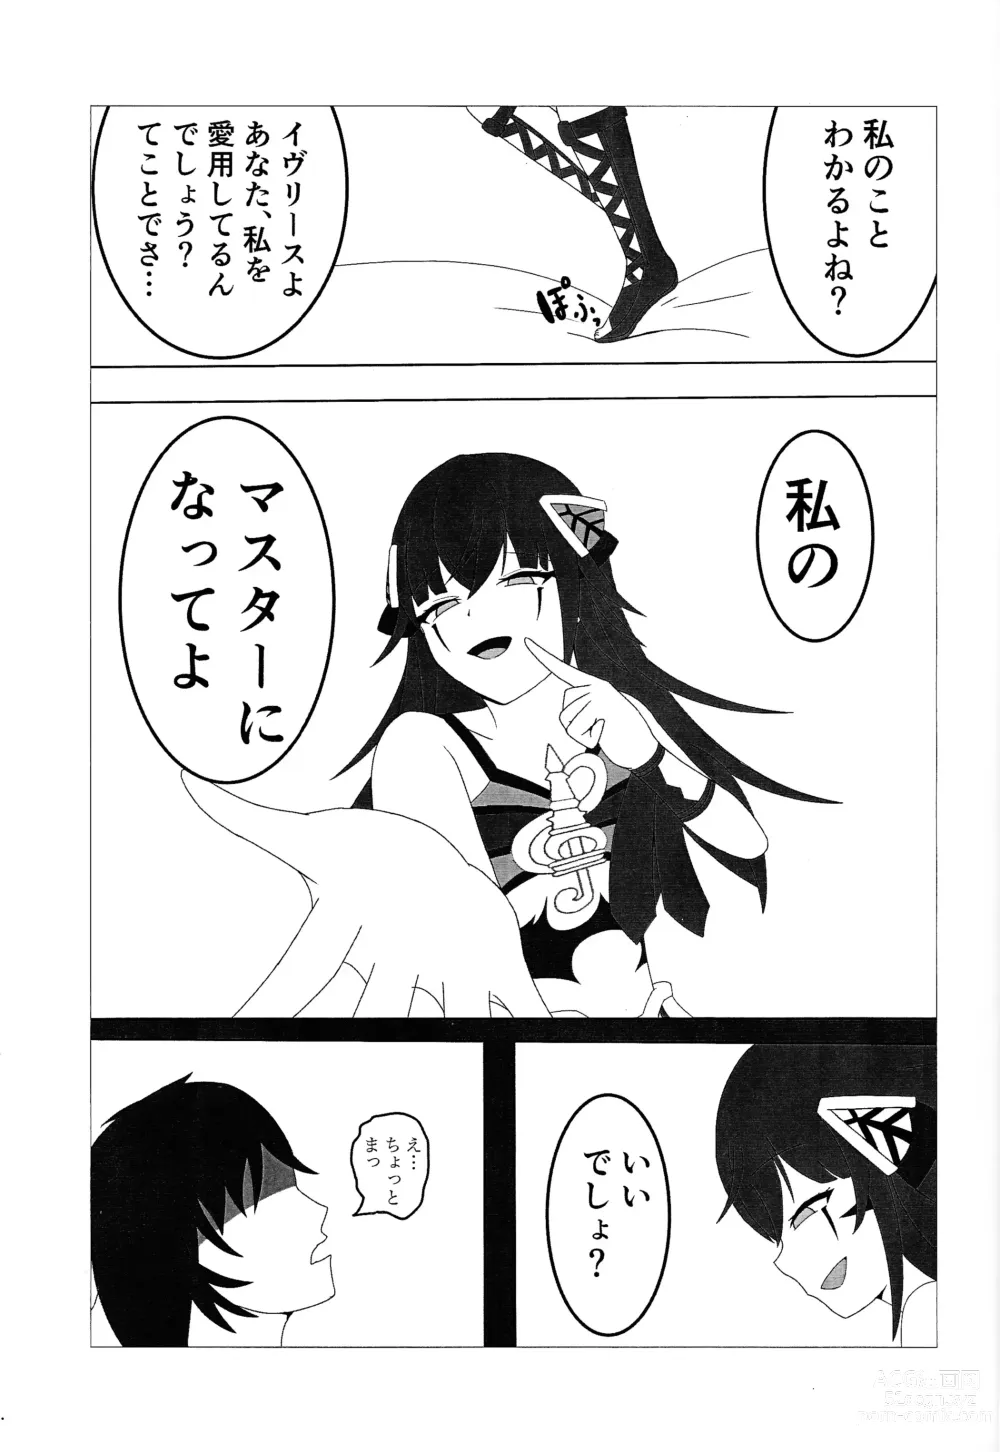 Page 4 of doujinshi FLAMES OF THIS AFFECTION